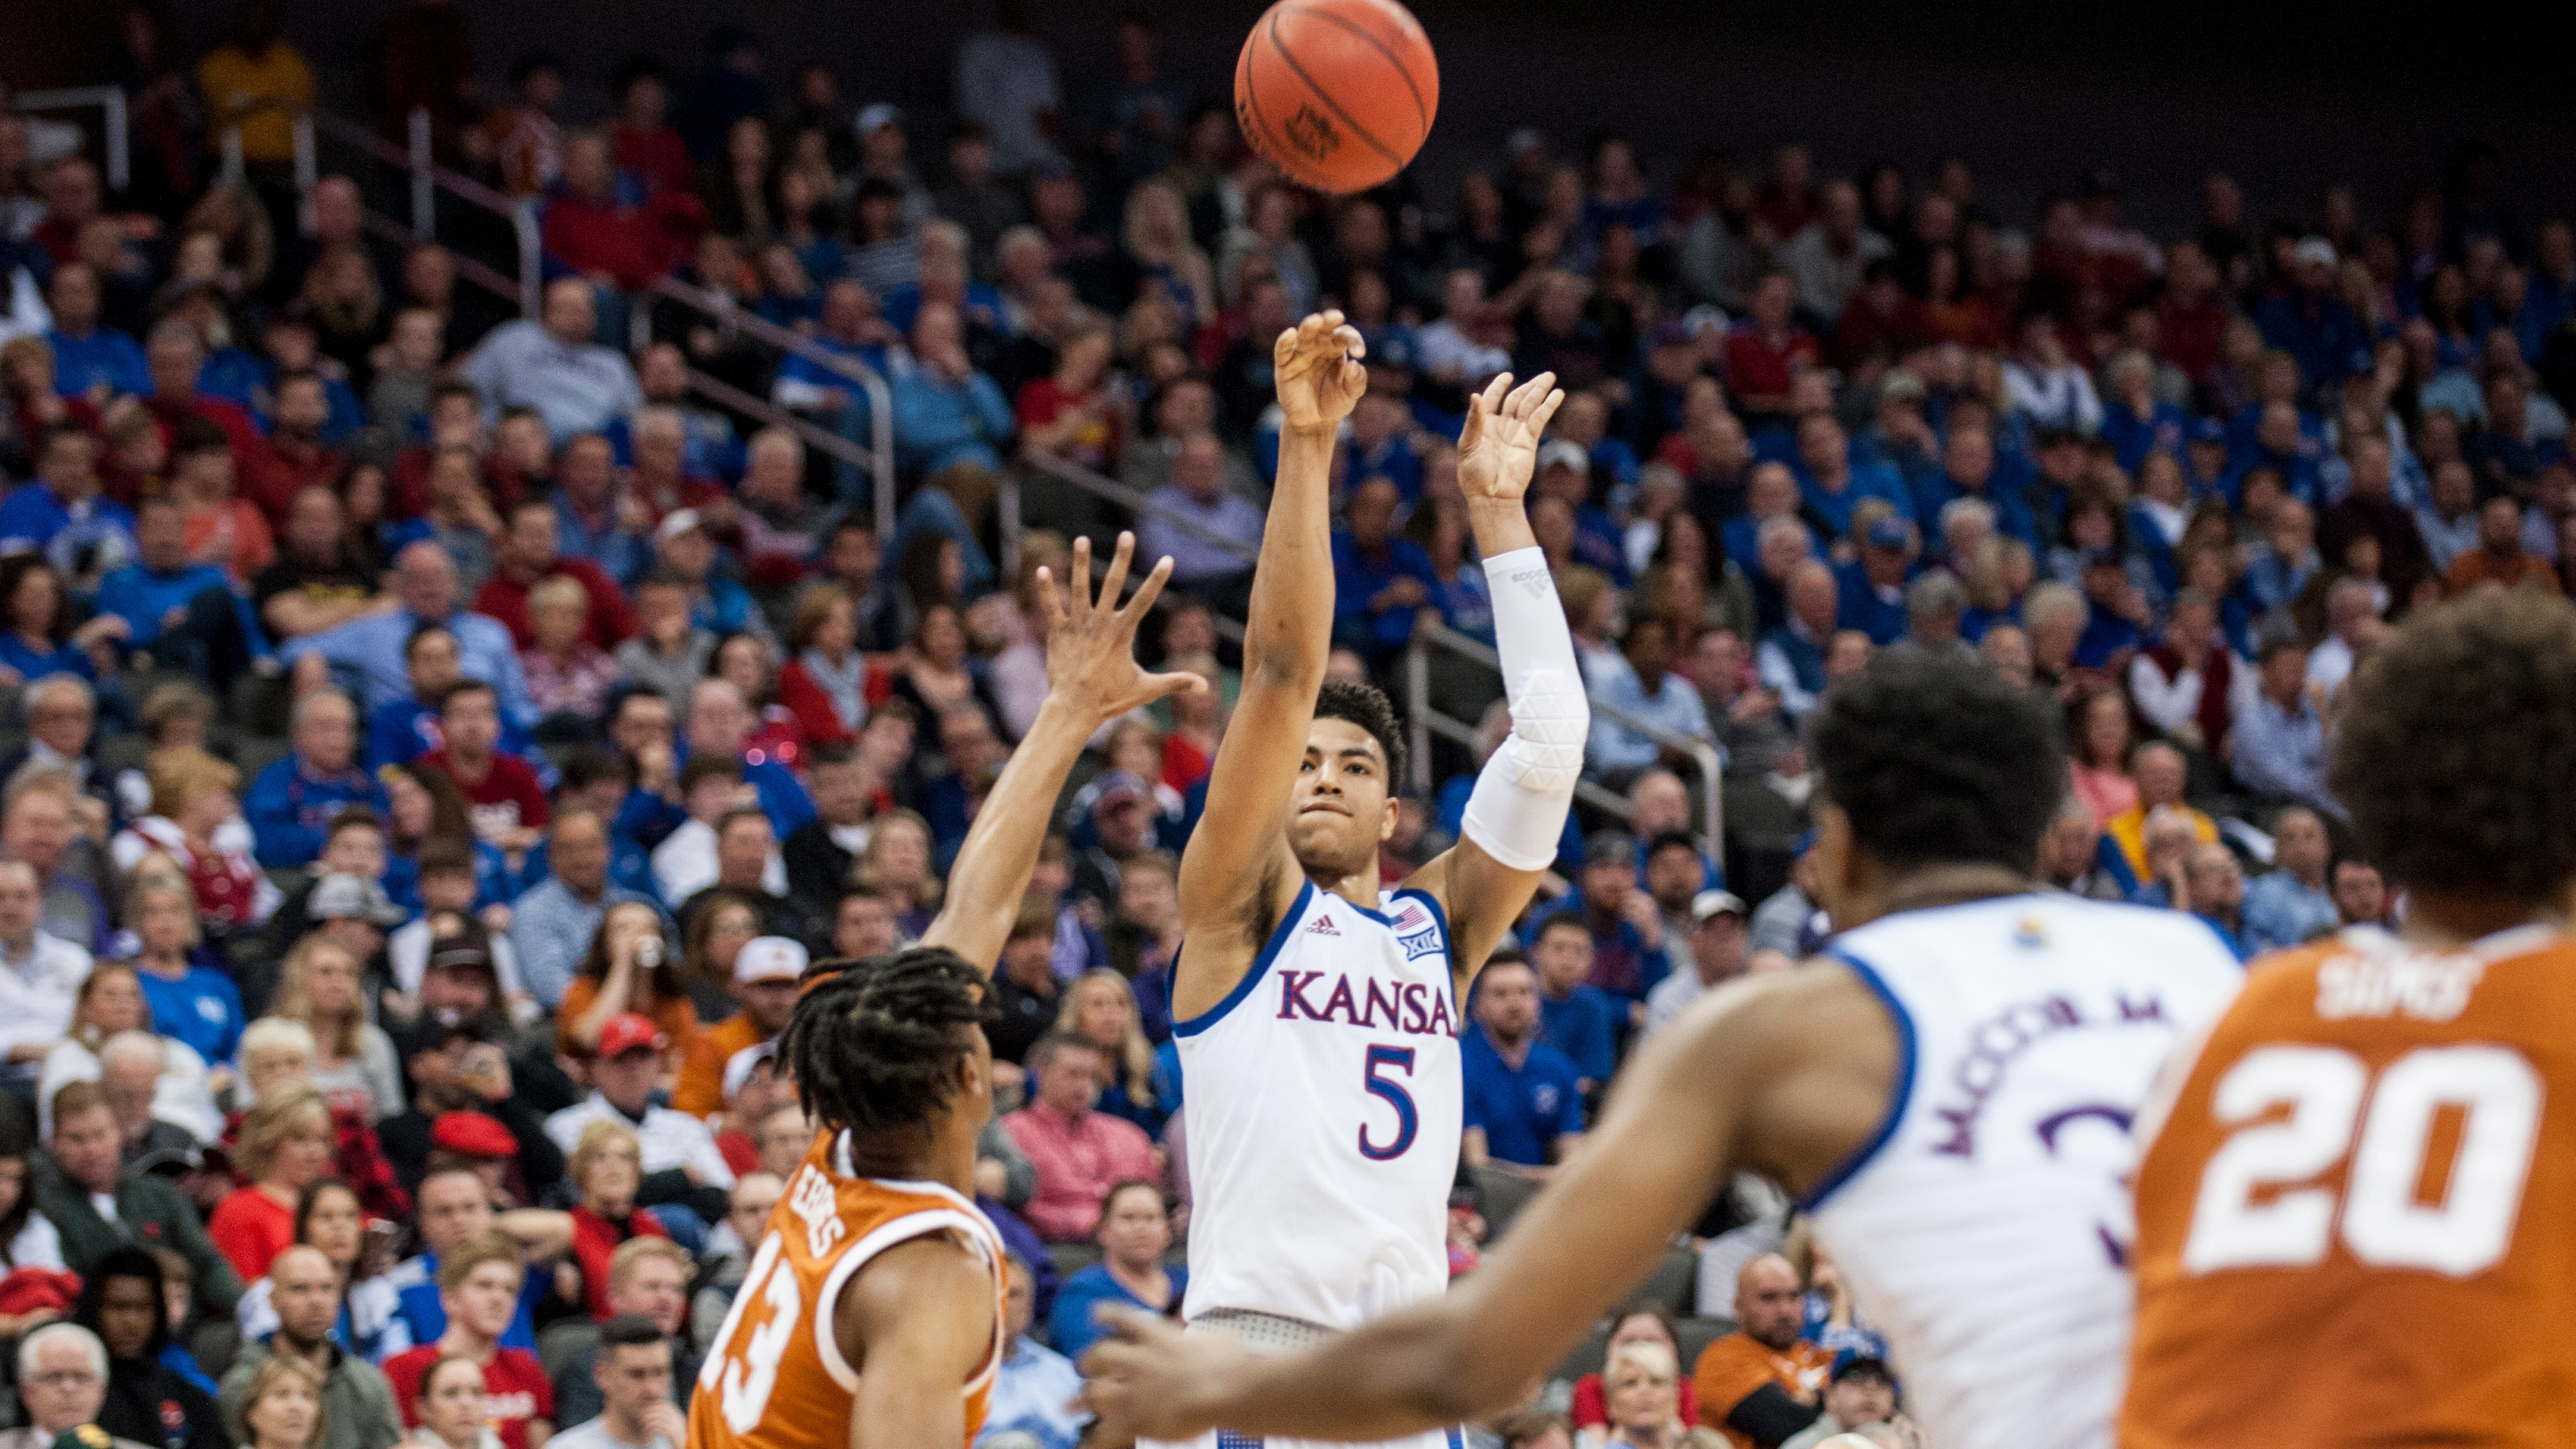 Kansas fends off Texas 65-57 to advance to Big 12 semifinals